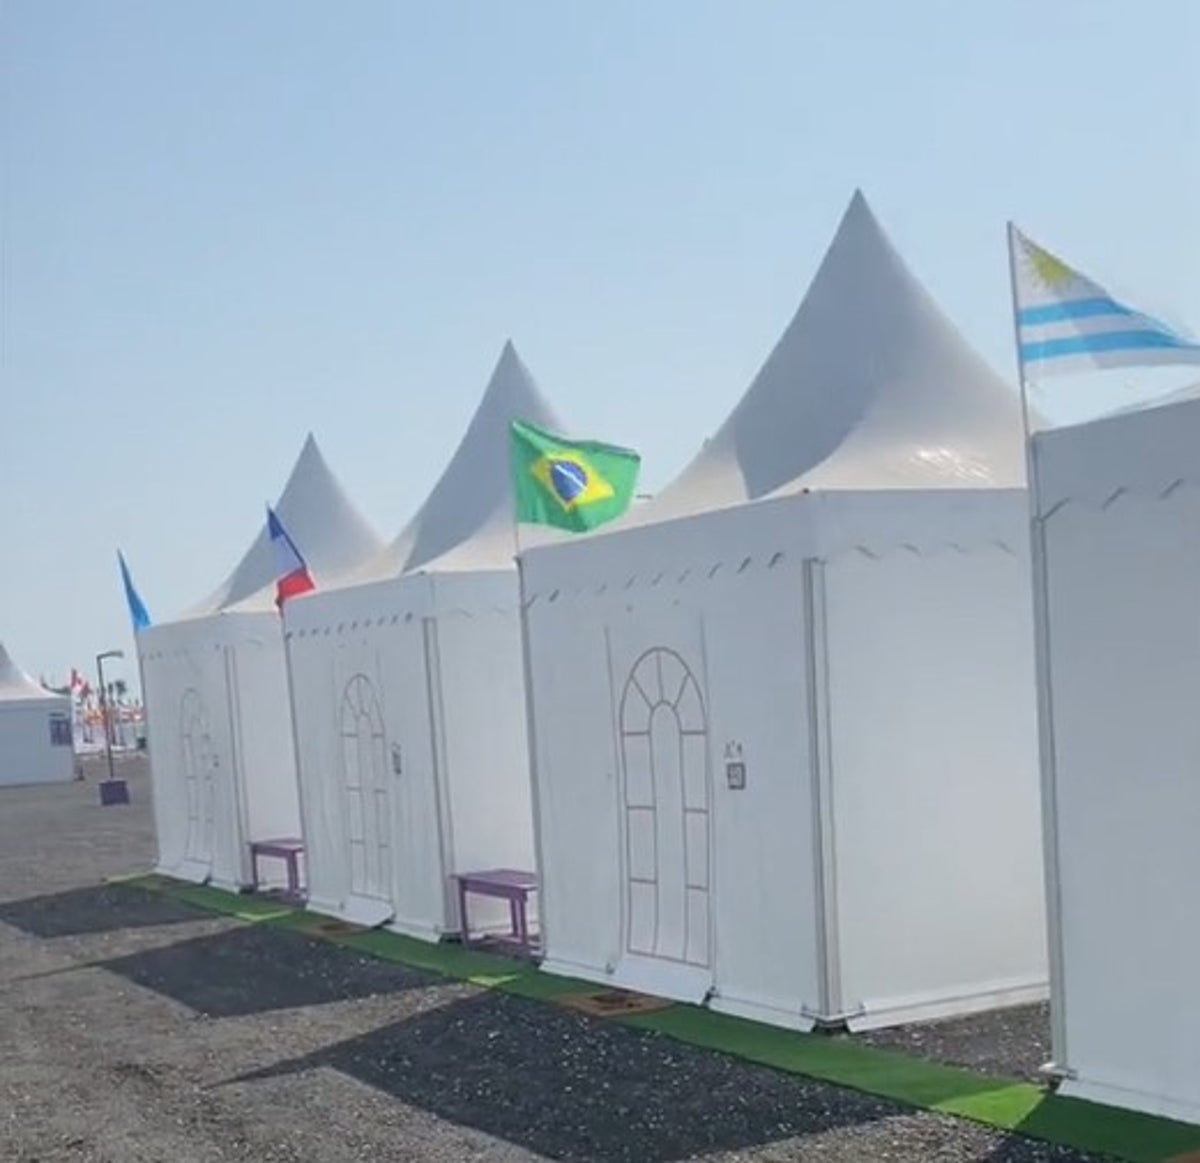 In Sao Paulo, Dutch fans at the World Cup put up tent camp where